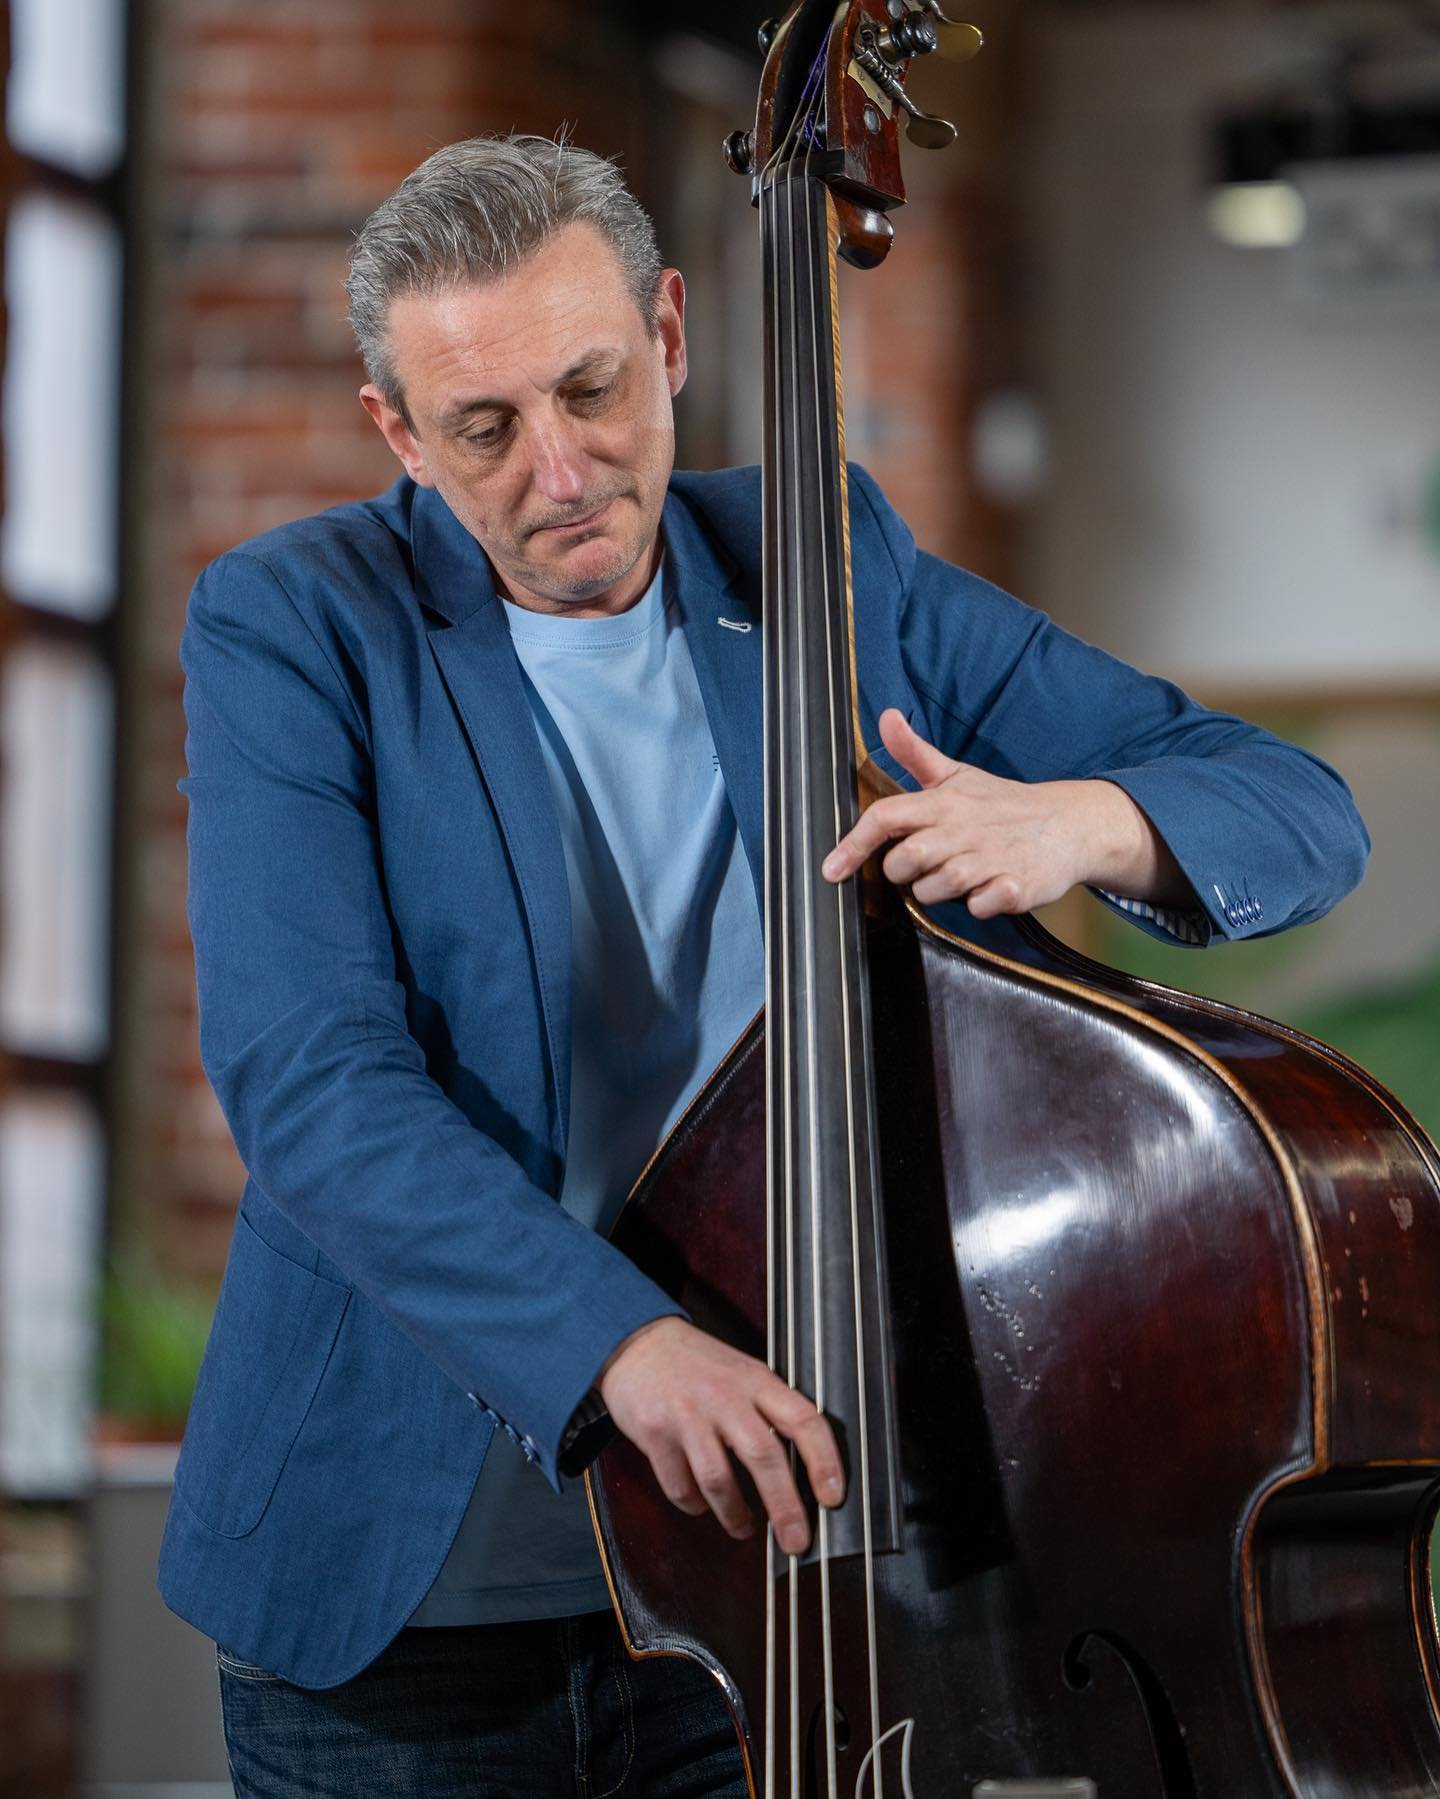 Maestro @vasilicnenad taking the DDB house bass for a spin in our latest interview! He really made it sing! 

#nenadvasilic #discoverdoublebass #jazzbassist #basssolo #uprightbass #doublebass #bassvirtuoso